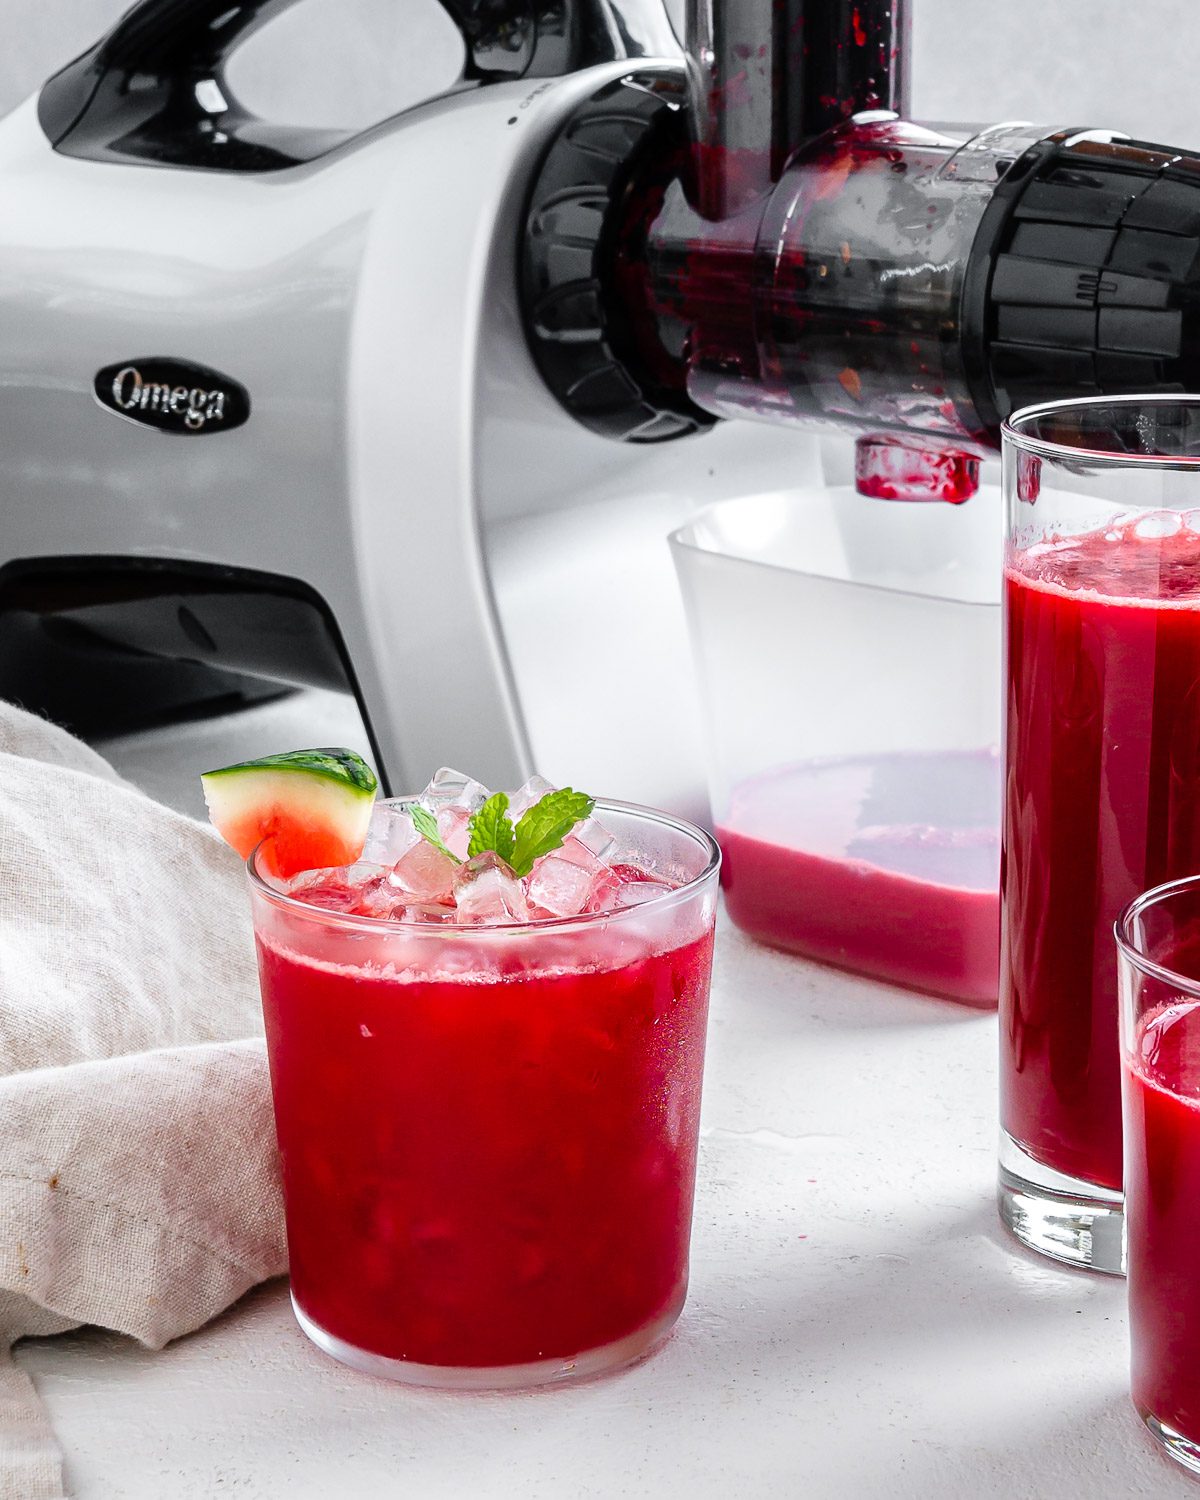 completed Fresh Watermelon Juice Blend in a glass cut with two cups and juicer in the background